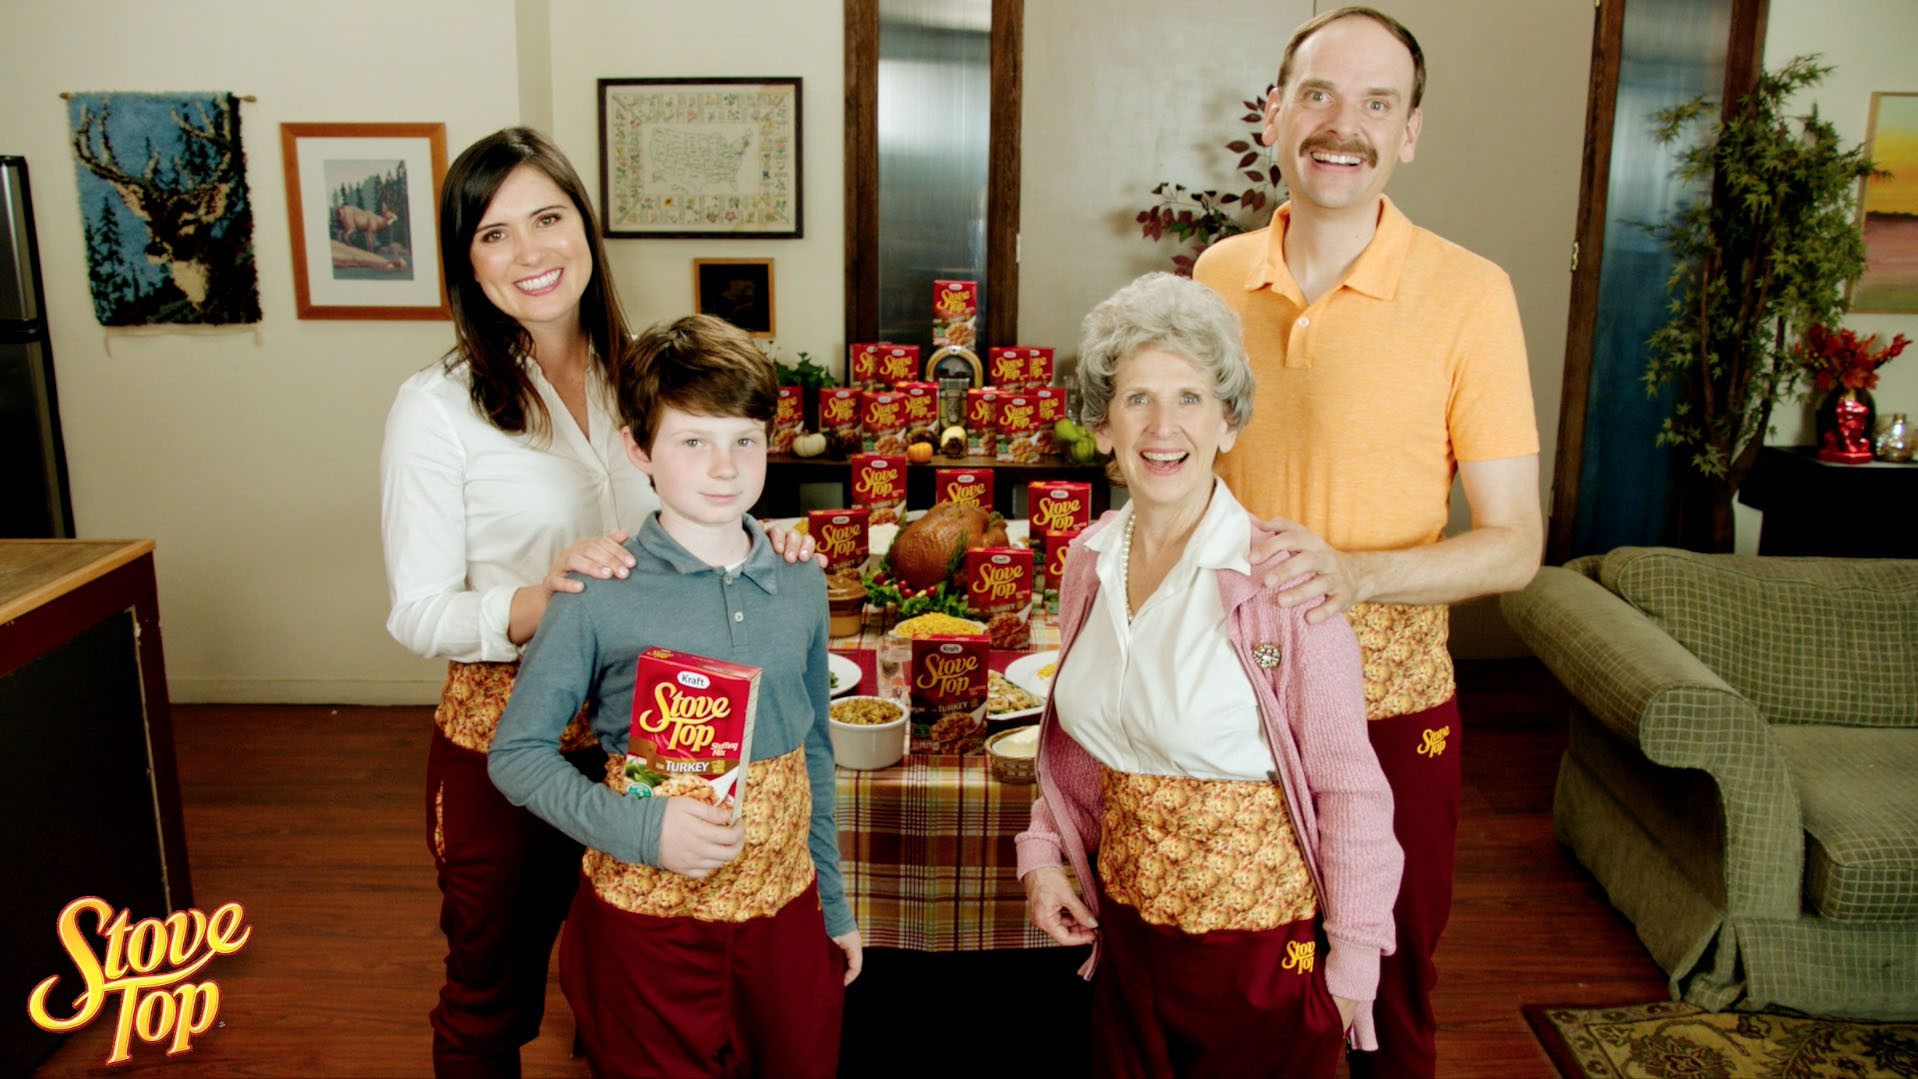 Thanksgiving Dinner Pants
 Stove Top Stuffing Is Selling Pants That Stretch for